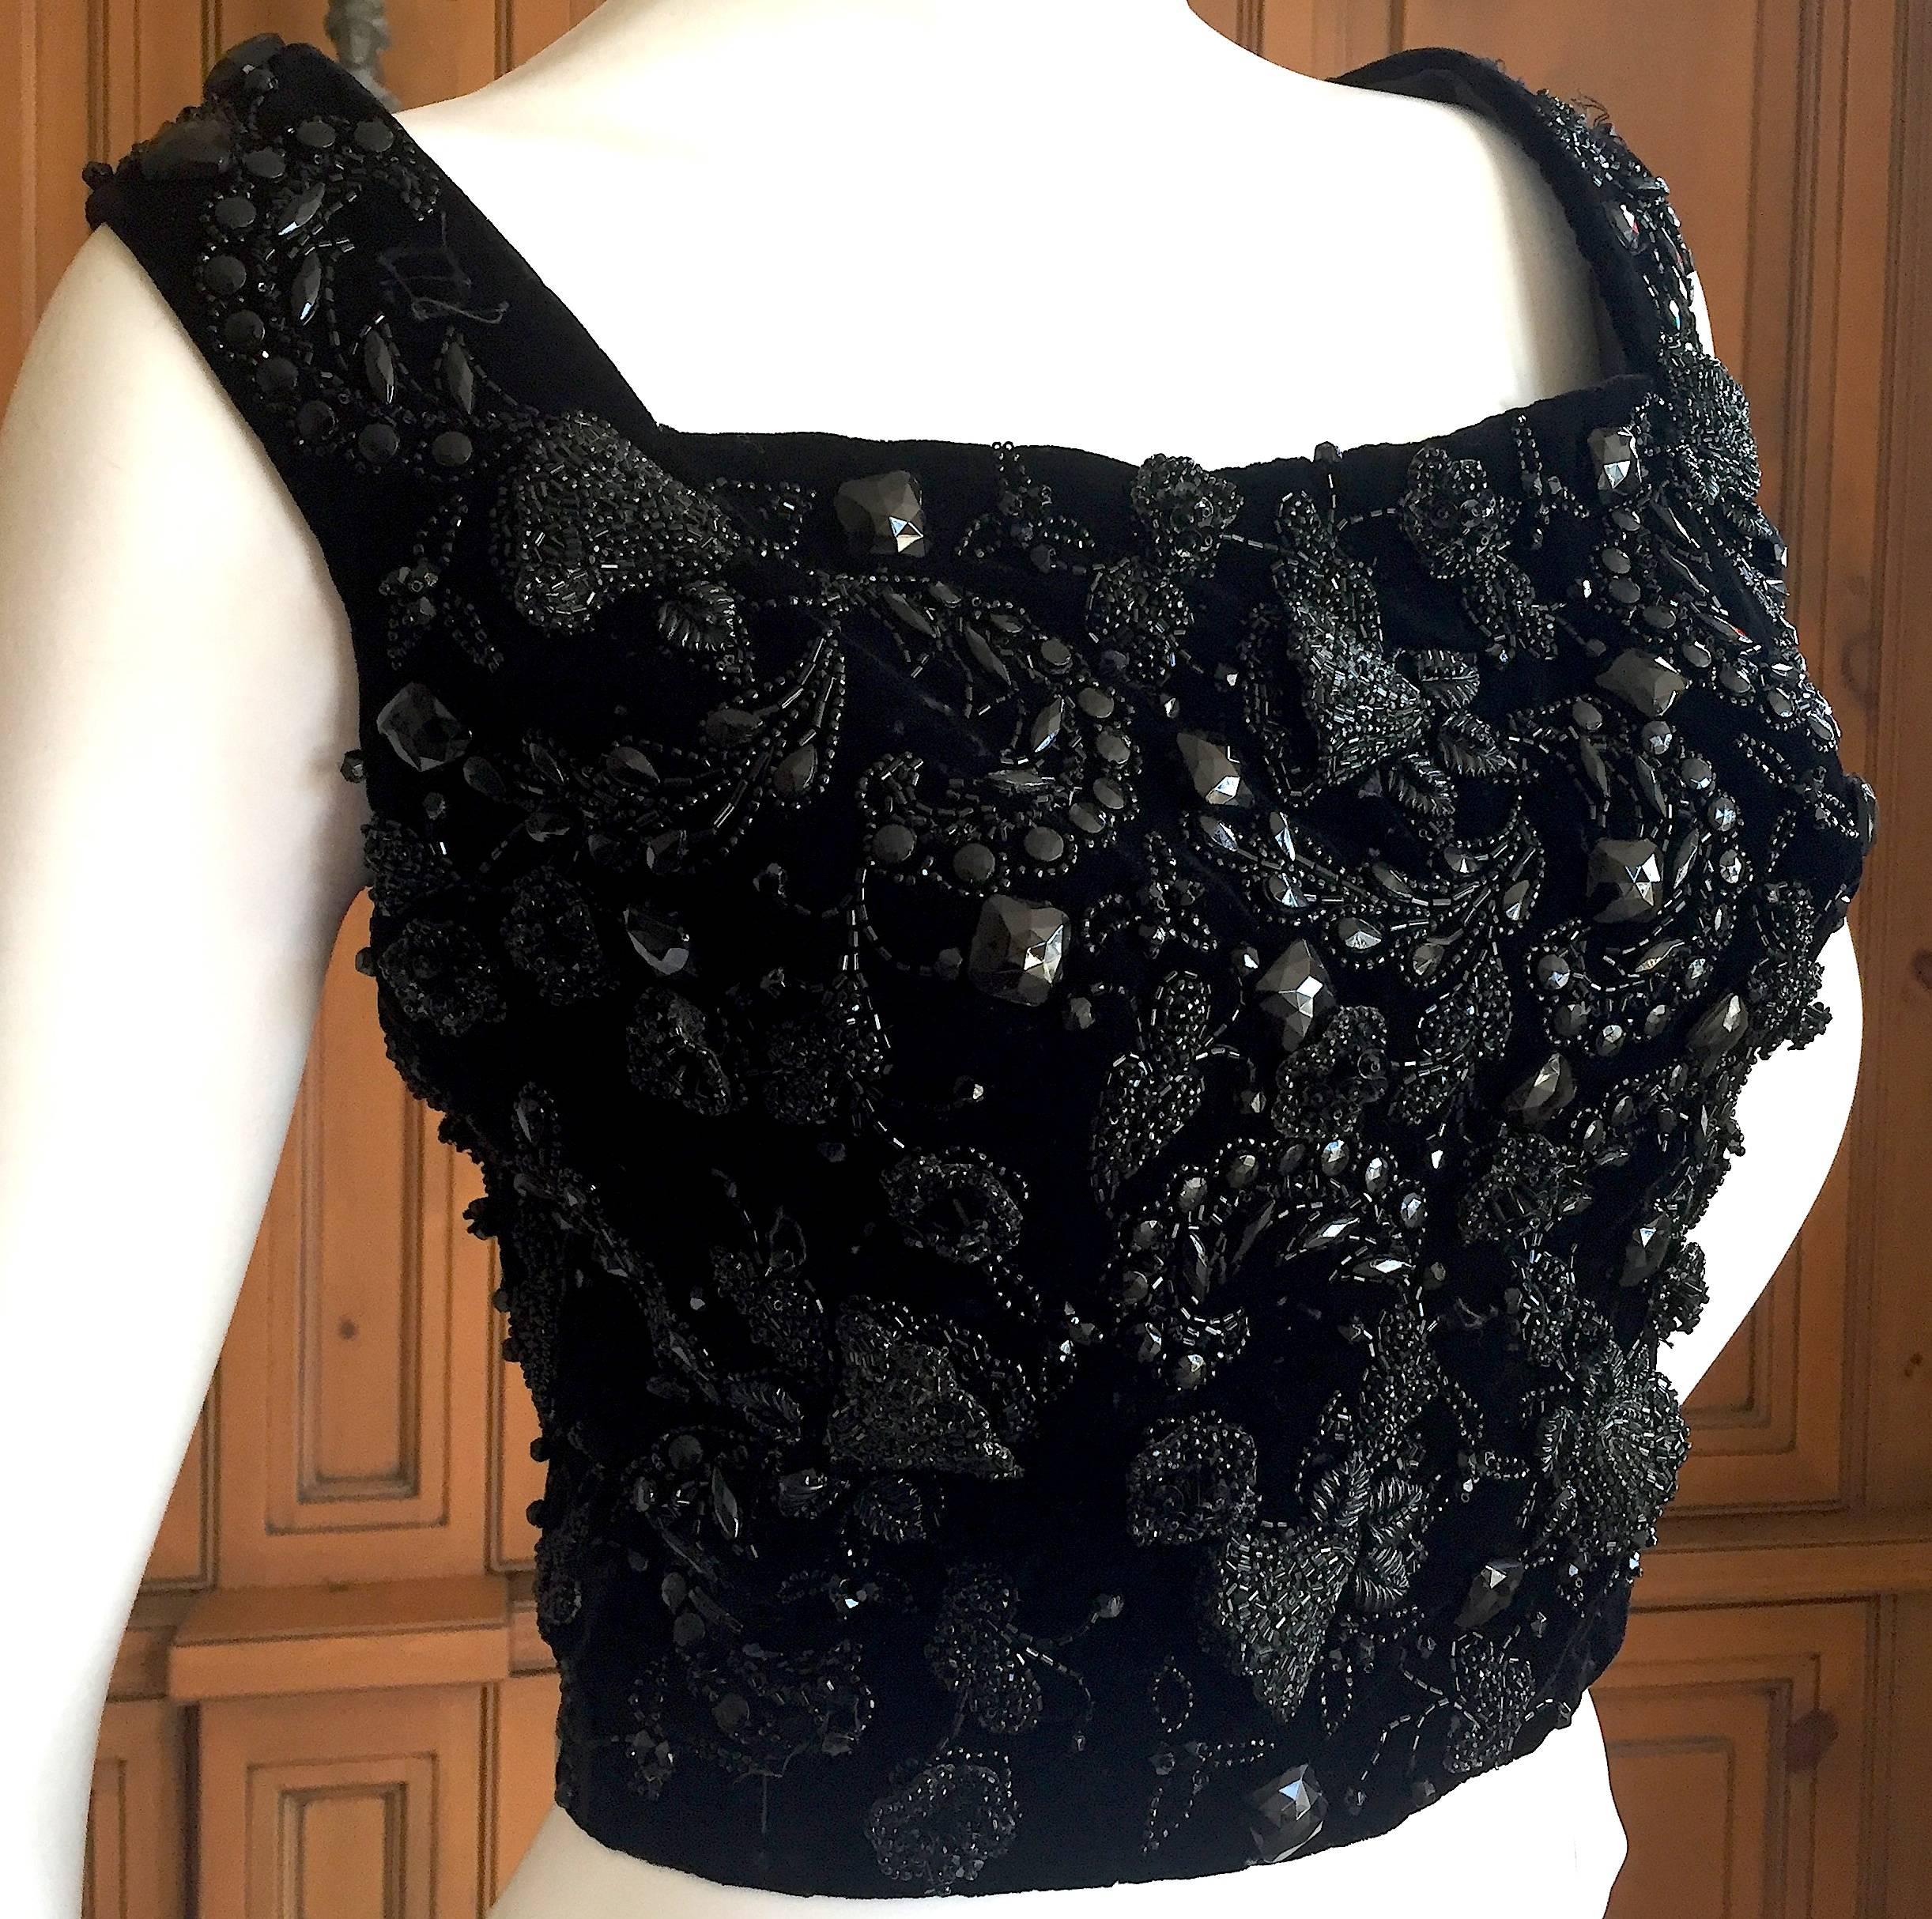 Magnificent black velvet top with superb jet beading from Christian Dior-London circa 1958.
Amazing beadwork, the label reads Christian Dior -London, Modele Original and is numbered.
Corset style hook eye closures up the back.
Bust 38